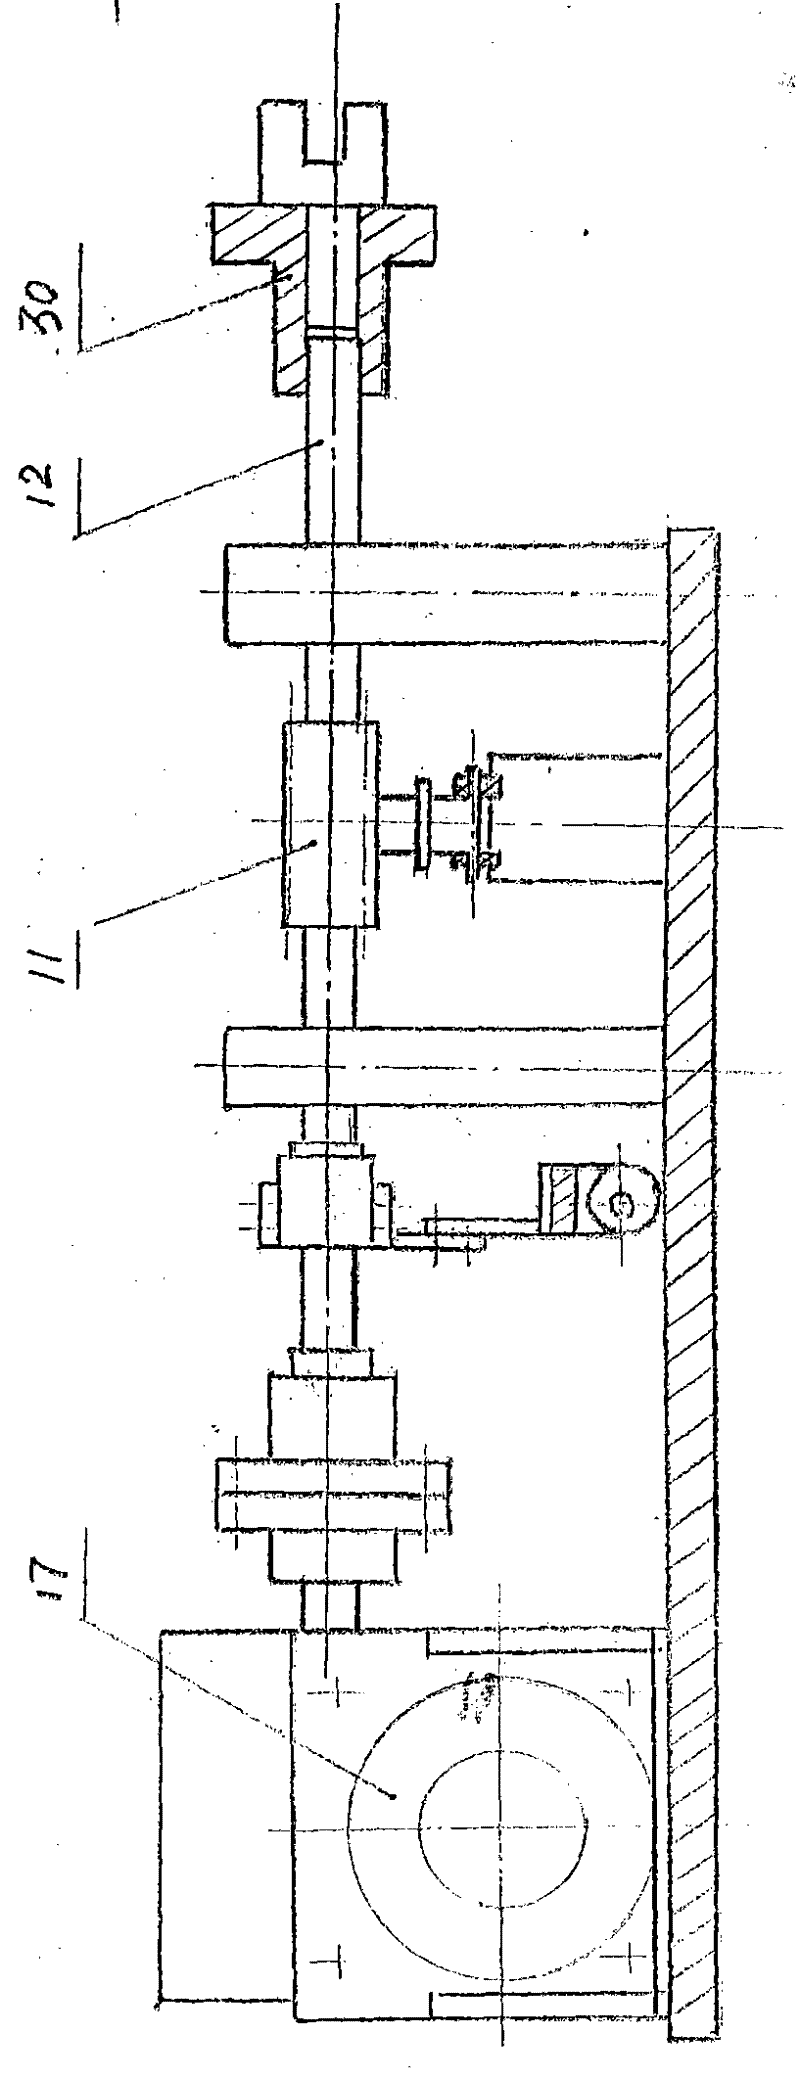 Transmission mechanism of multifunctional testing equipment for ignition lock